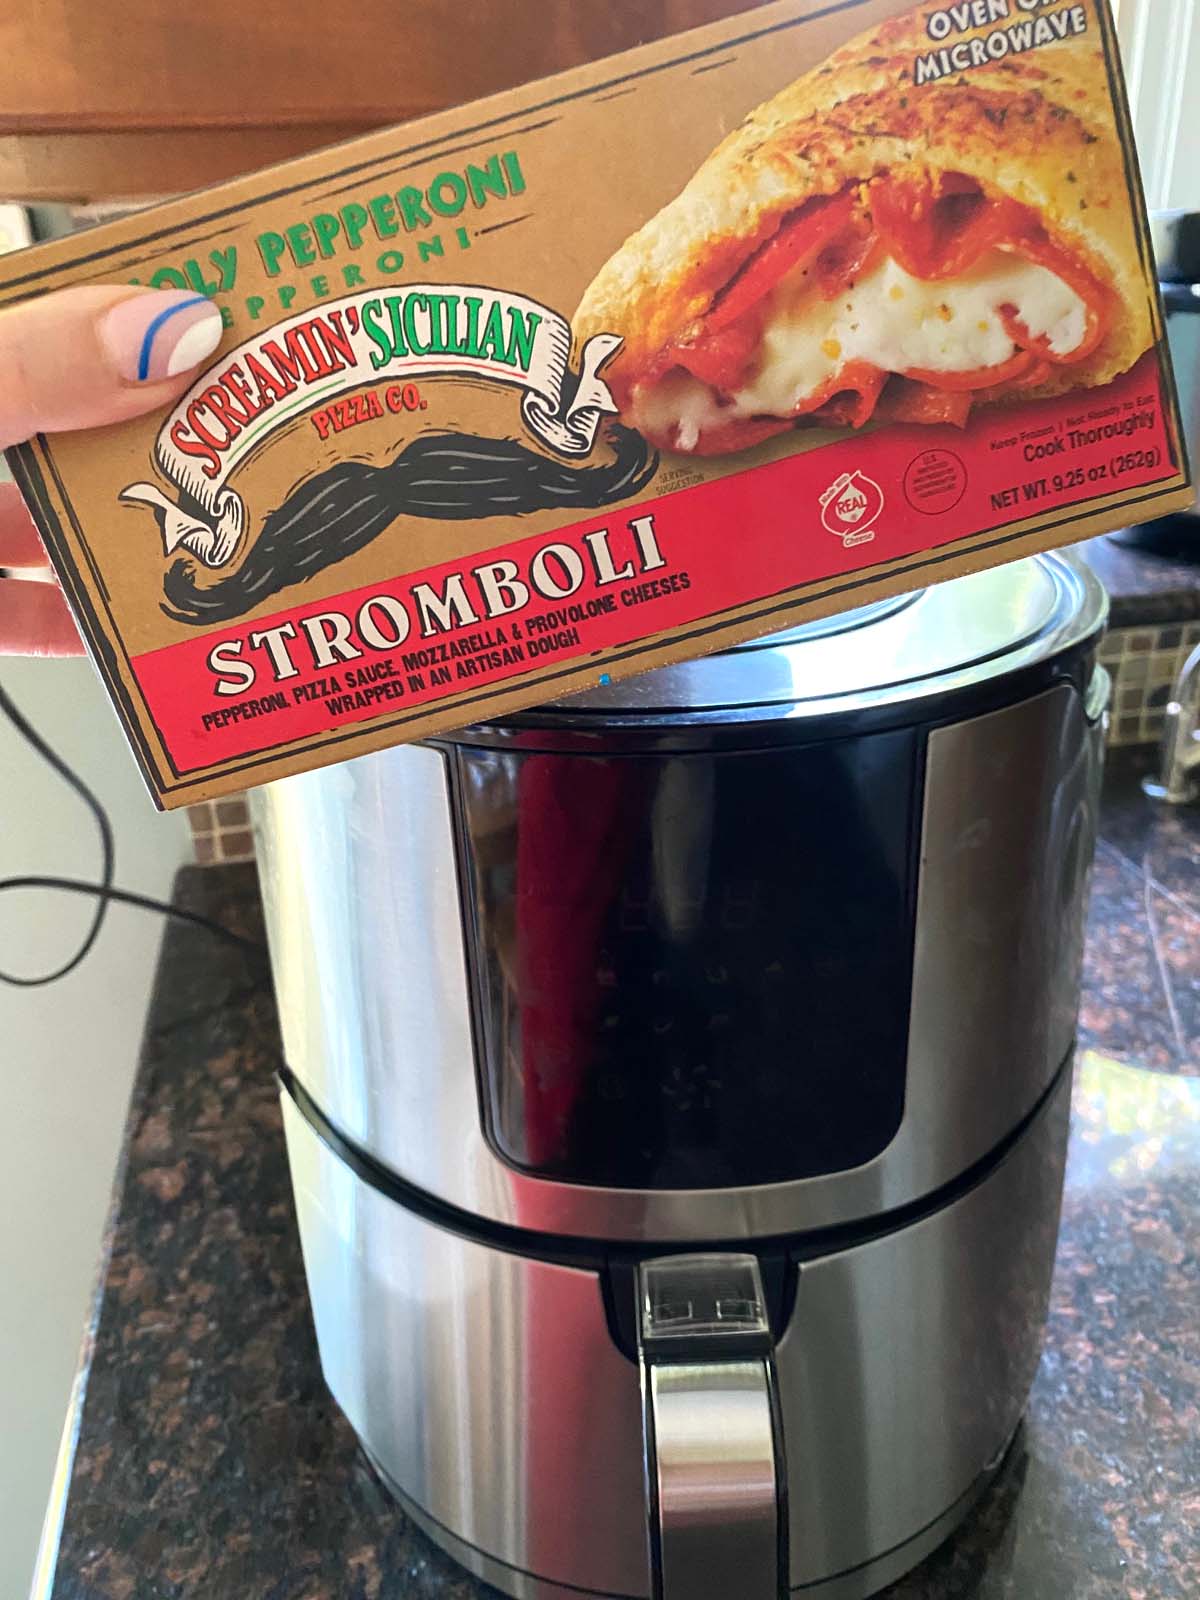 A package of stromboli being shown in front of an air fryer.